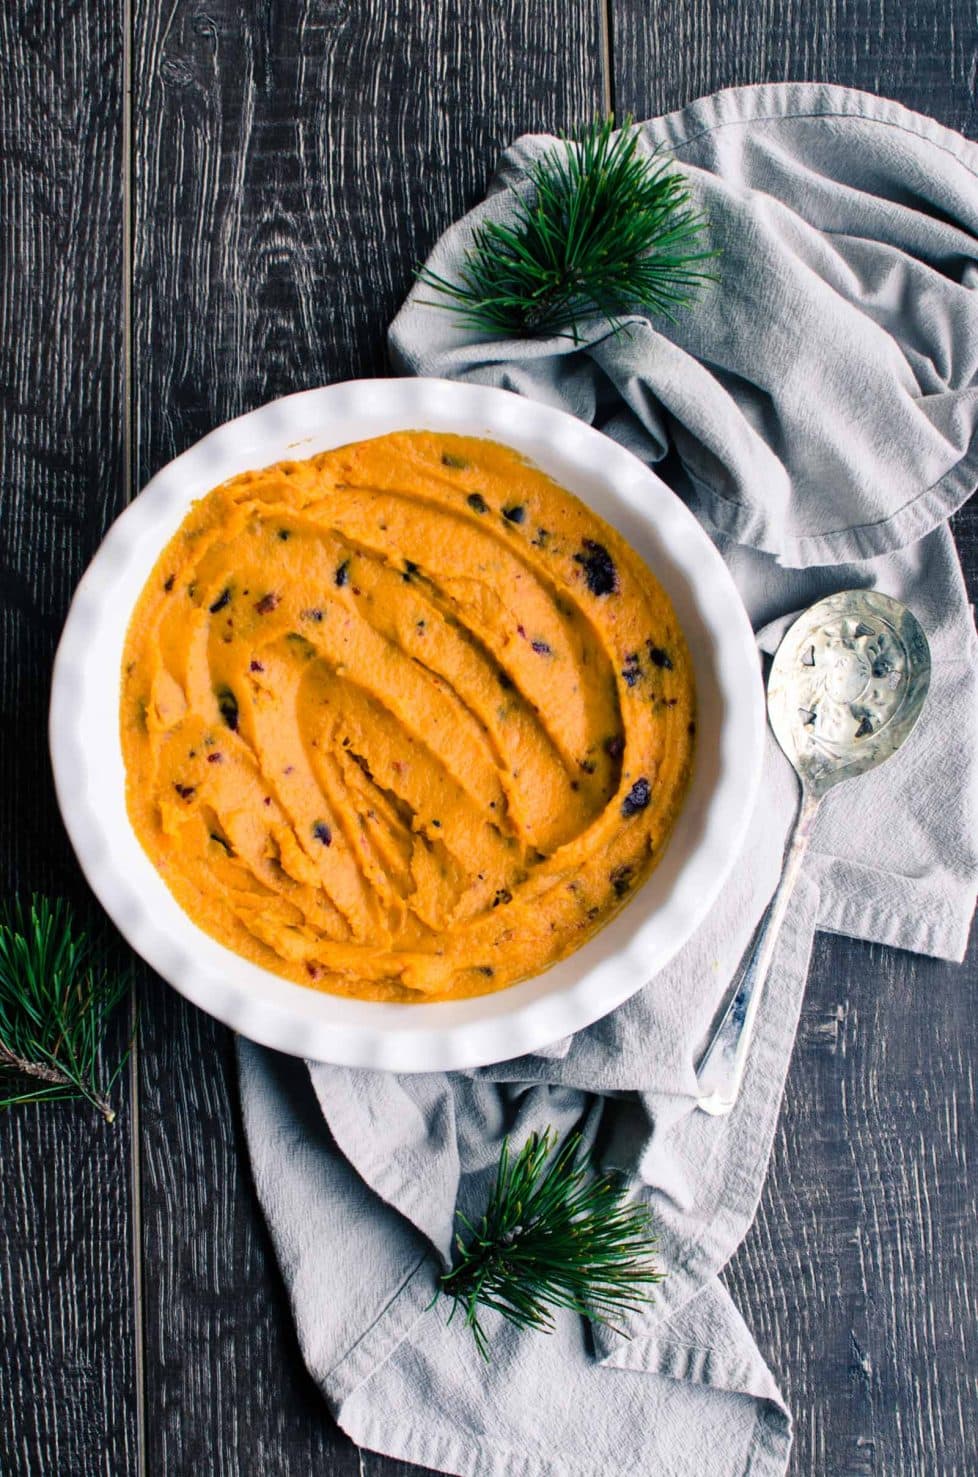 This recipe for Maple Chipotle Whipped Sweet Potatoes is a healthy side dish that's perfect for fall and winter. It can also be made ahead of time!